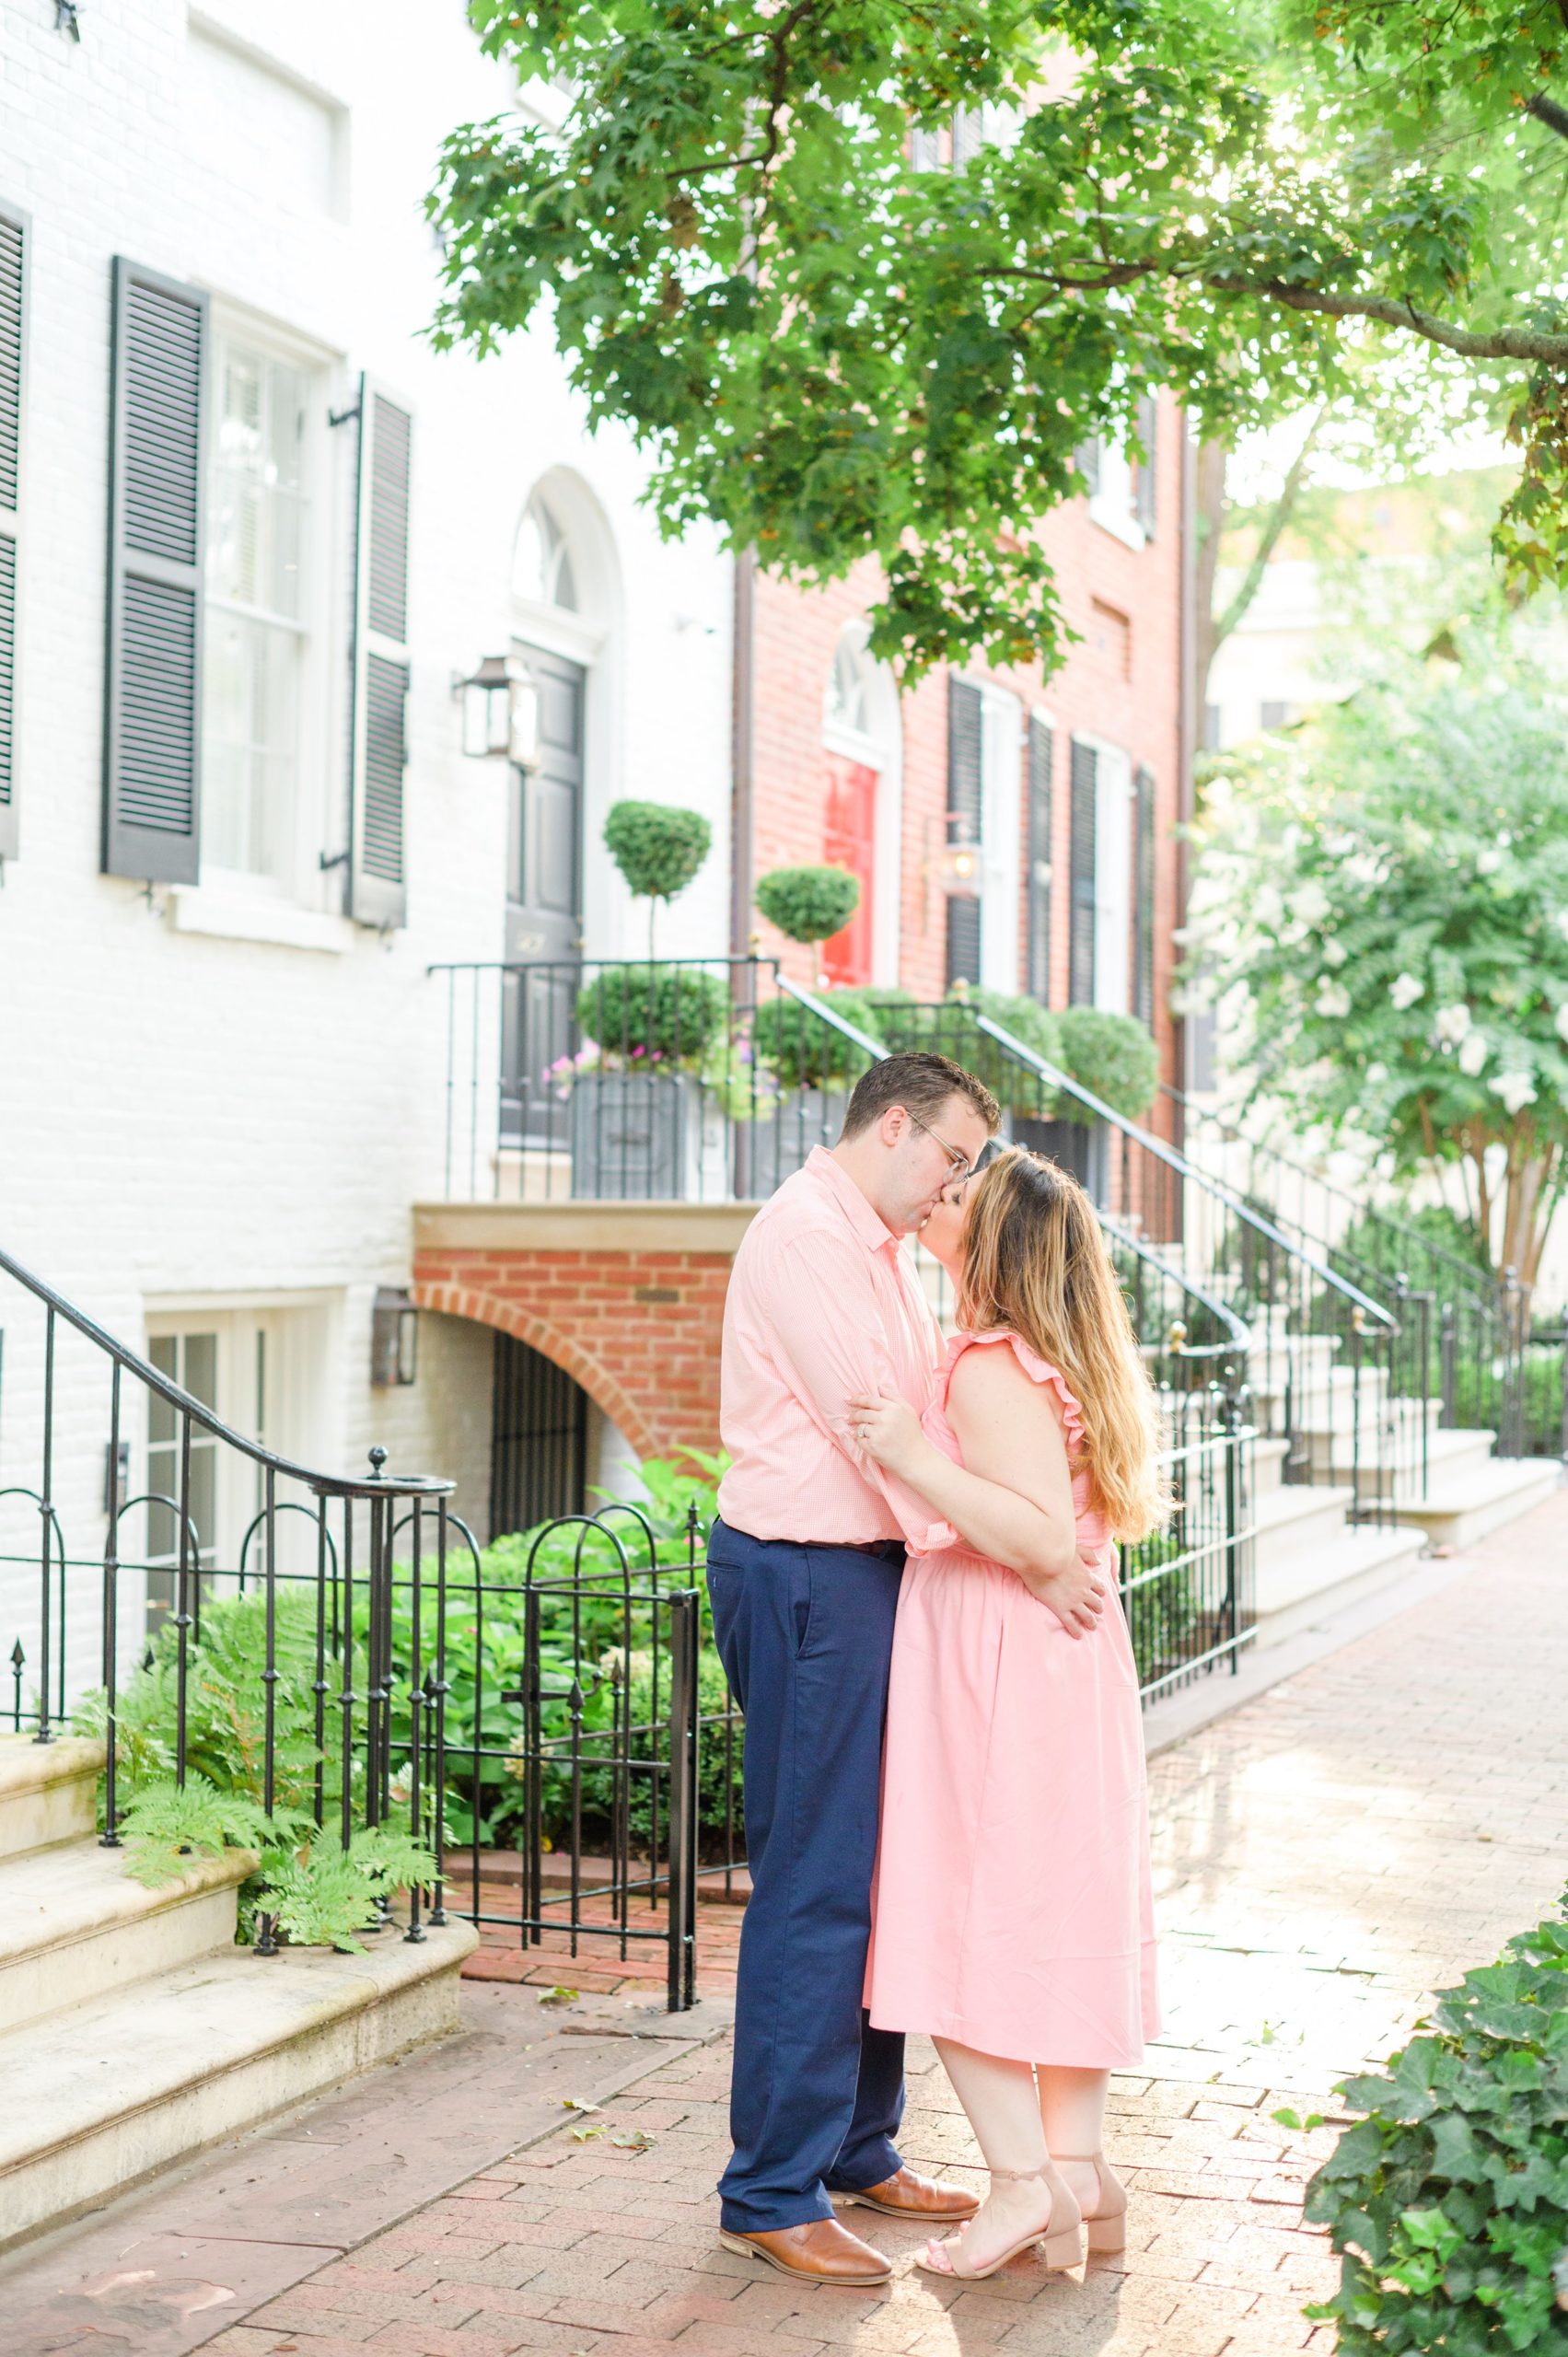 Engaged couple smiles in Georgetown, Washington, DC during engagement session photographed by Baltimore wedding photographer, Cait Kramer Photography